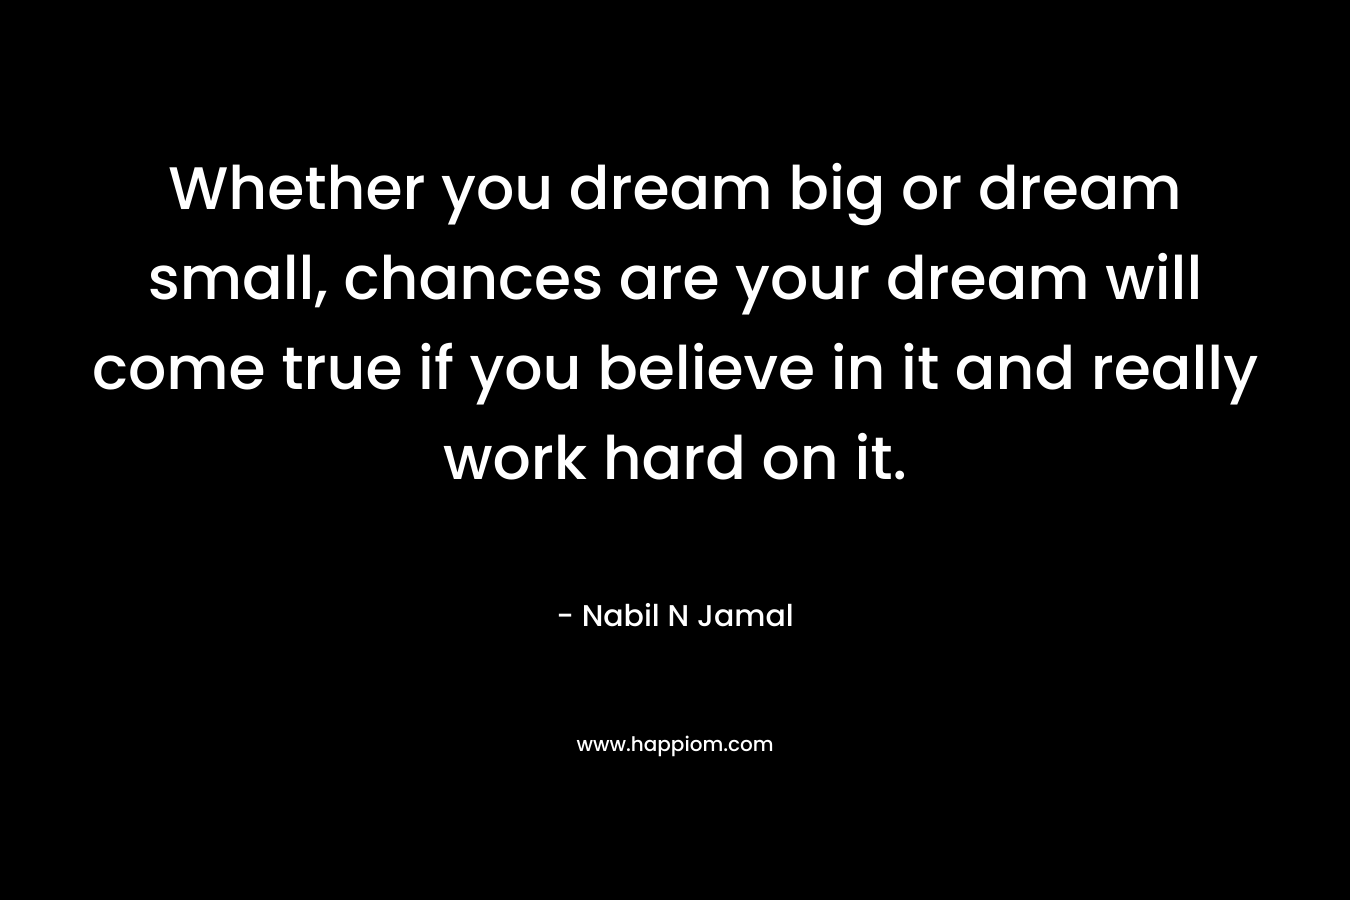 Whether you dream big or dream small, chances are your dream will come true if you believe in it and really work hard on it.